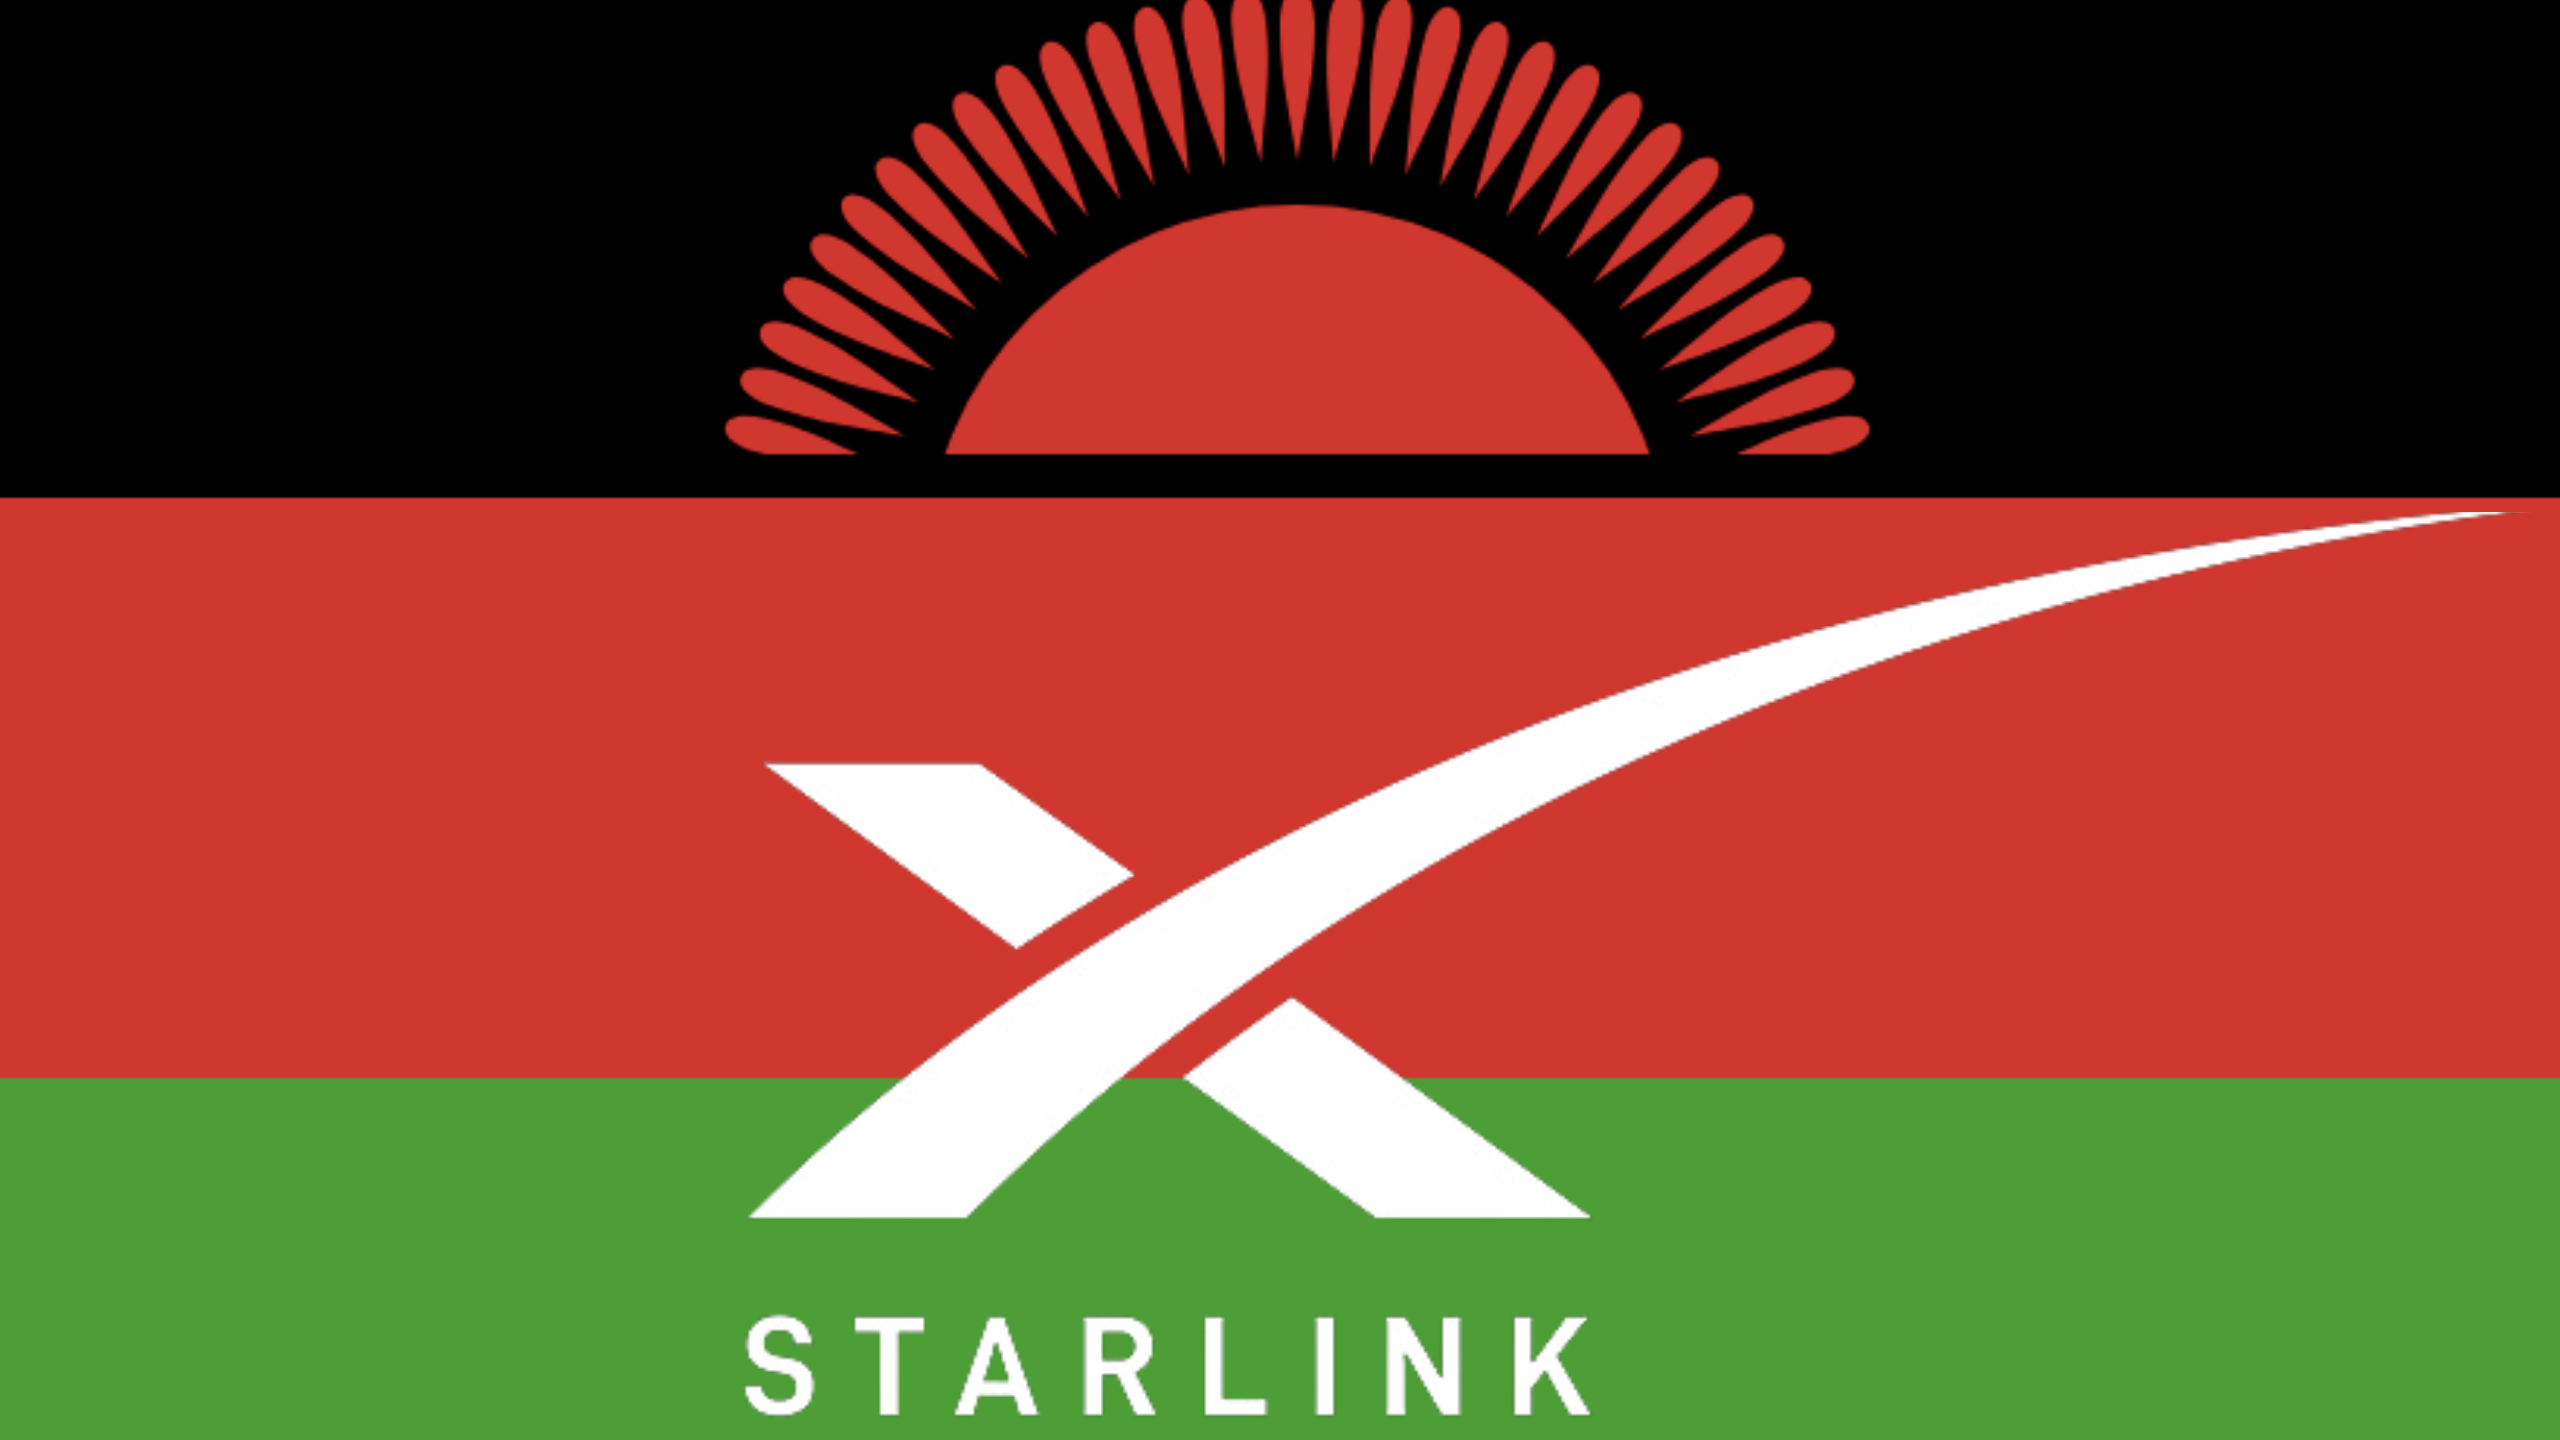 Starlink is coming to Malawi; MACRA director: "Welcome to Malawi, Starlink"